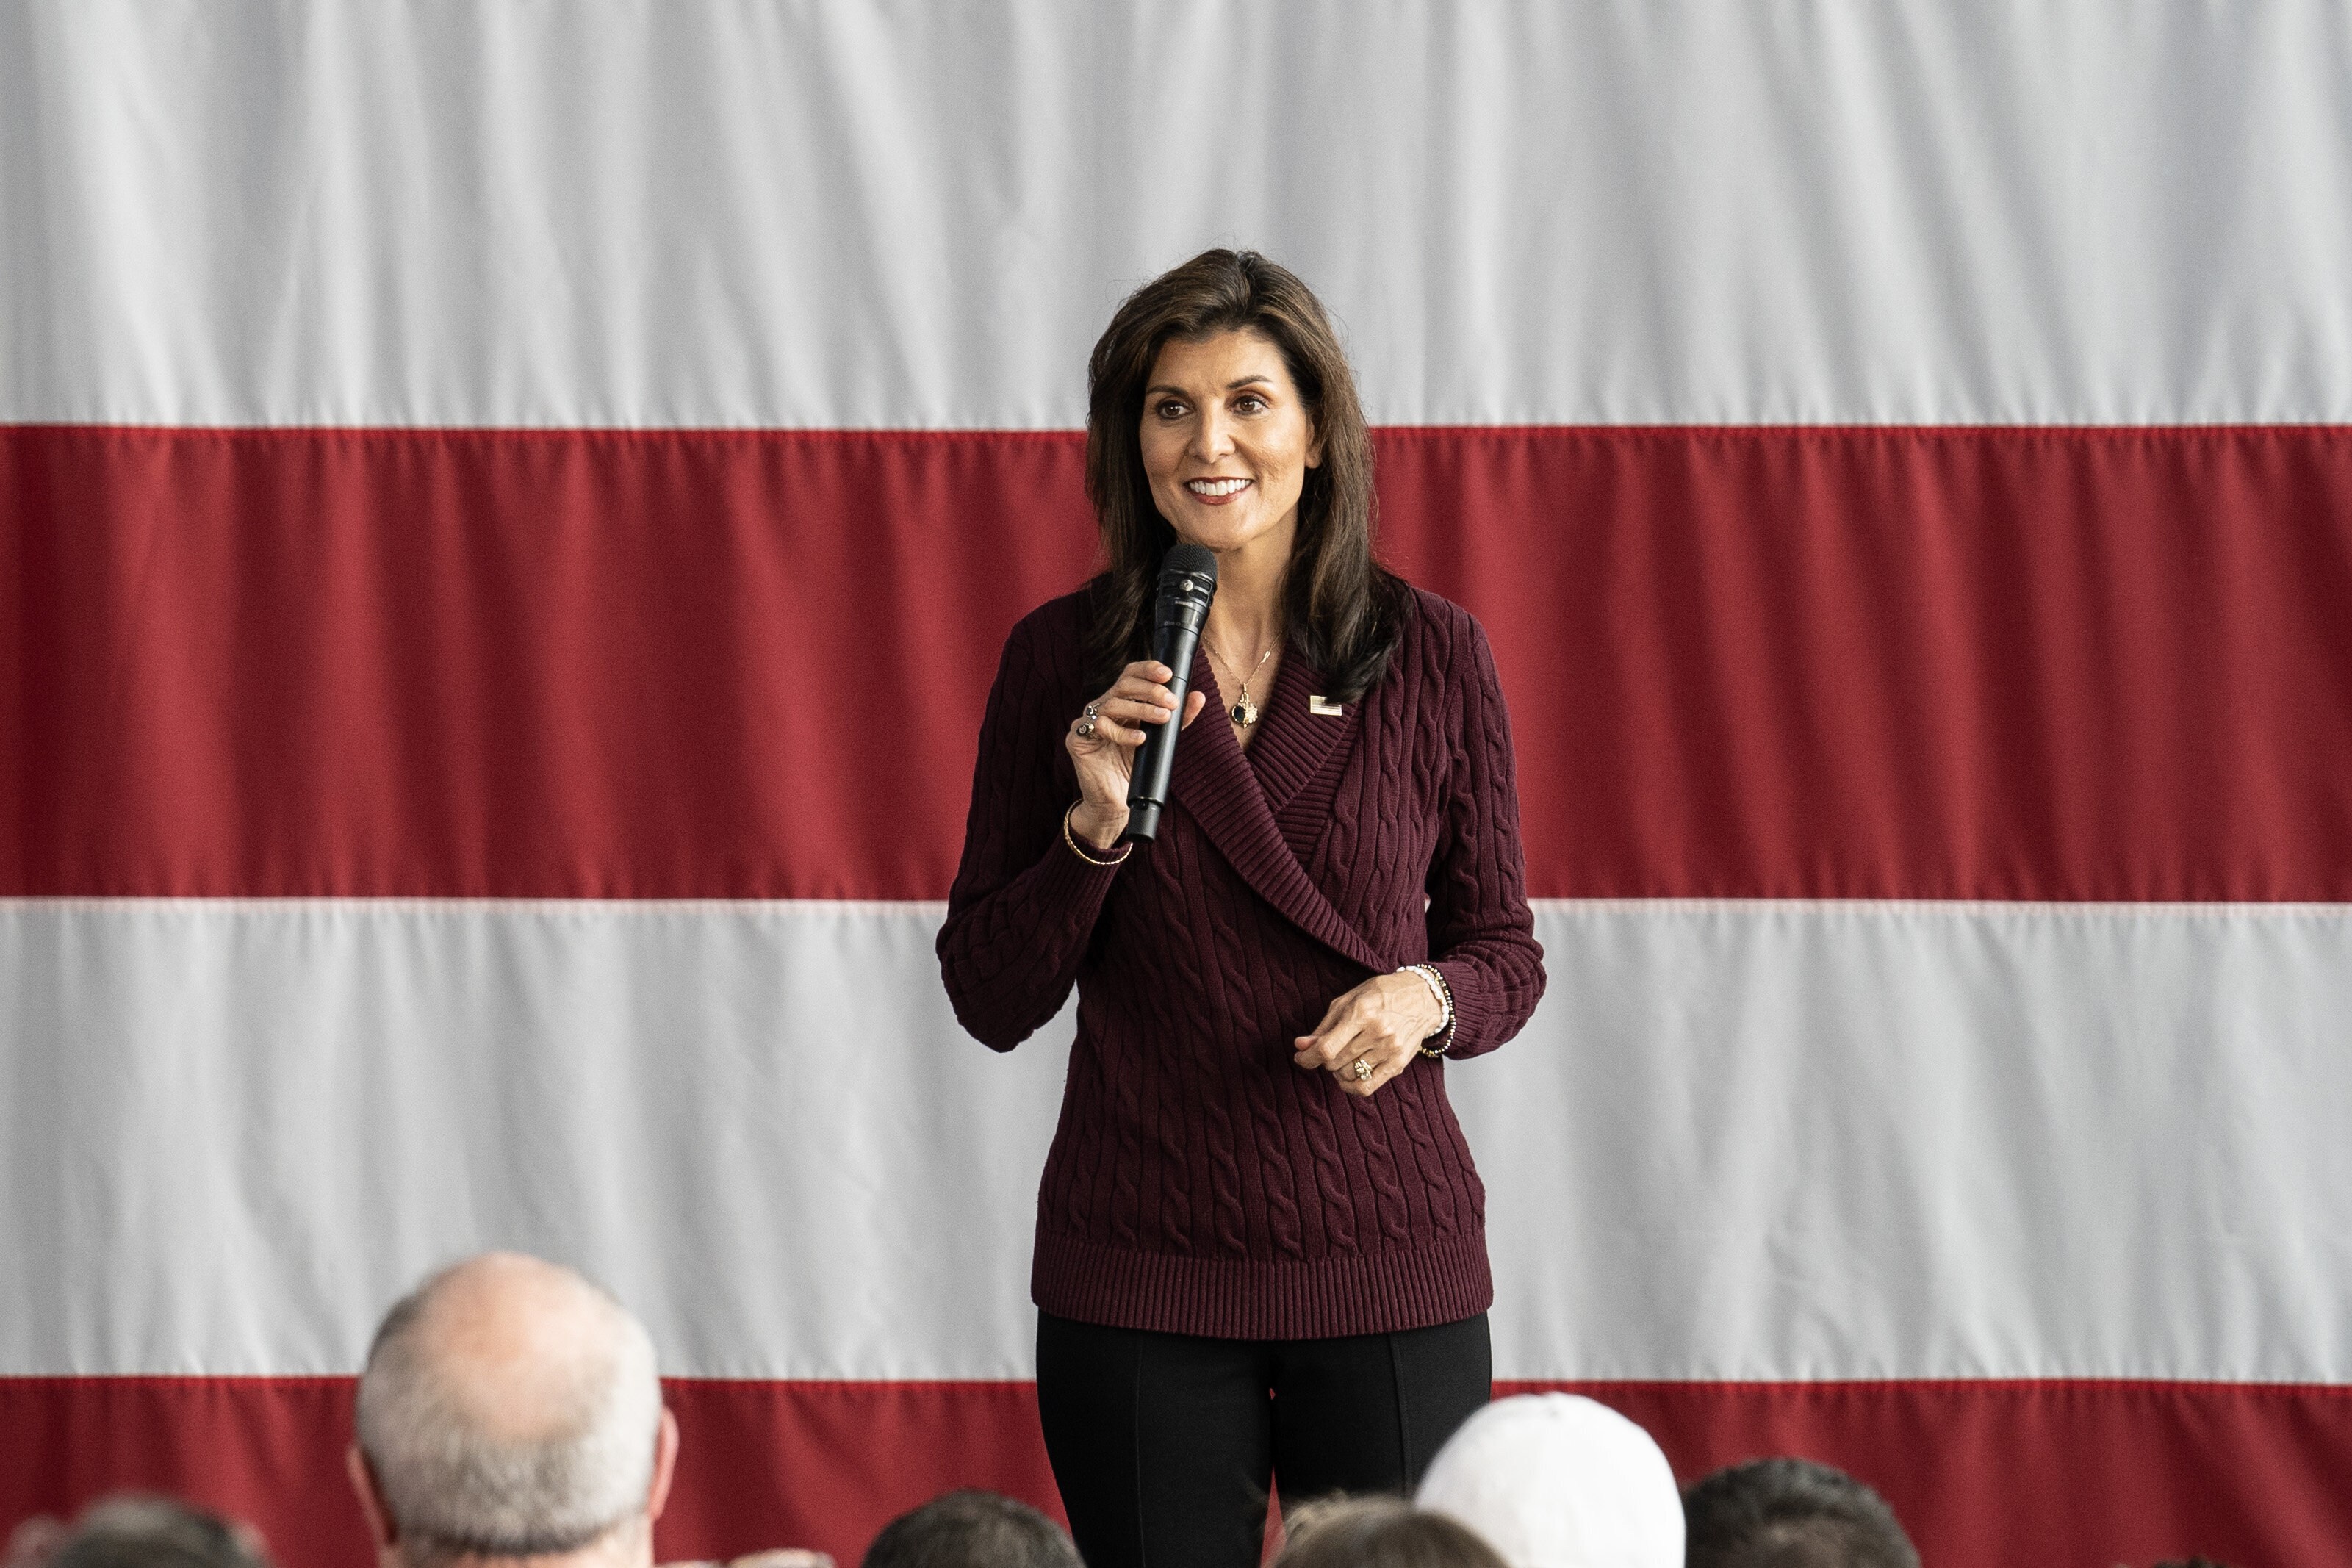 RALEIGH, NORTH CAROLINA - MARCH 2: Republican presidential candidate former U.N. Ambassador Nikki Haley speaks during a campaign rally at Raleigh Union Station on March 2, 2024 in Raleigh, North Carolina. Despite having lost every state primary thus far to Donald Trump, Haley intends to stay in the Republican race at least through Super Tuesday on March 5. (Photo by Eros Hoagland/Getty Images)